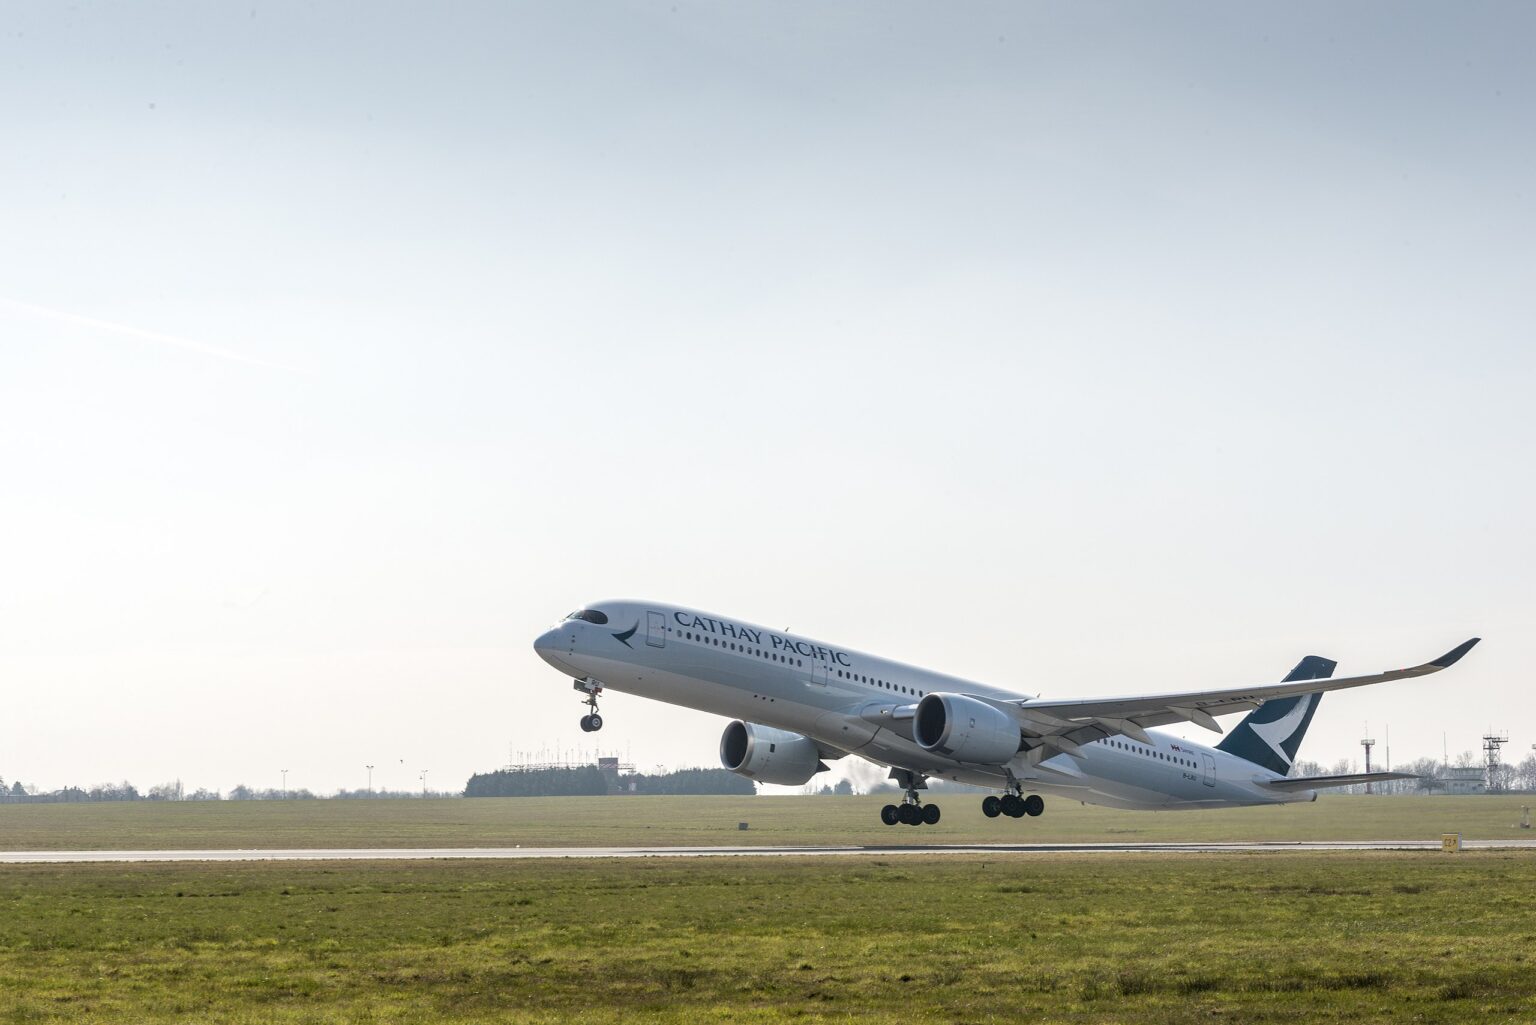 A Cathay Pacific flight takes off from Brussels Airport. The plane has just taken off and it hasn't yet retracted its landing gear.